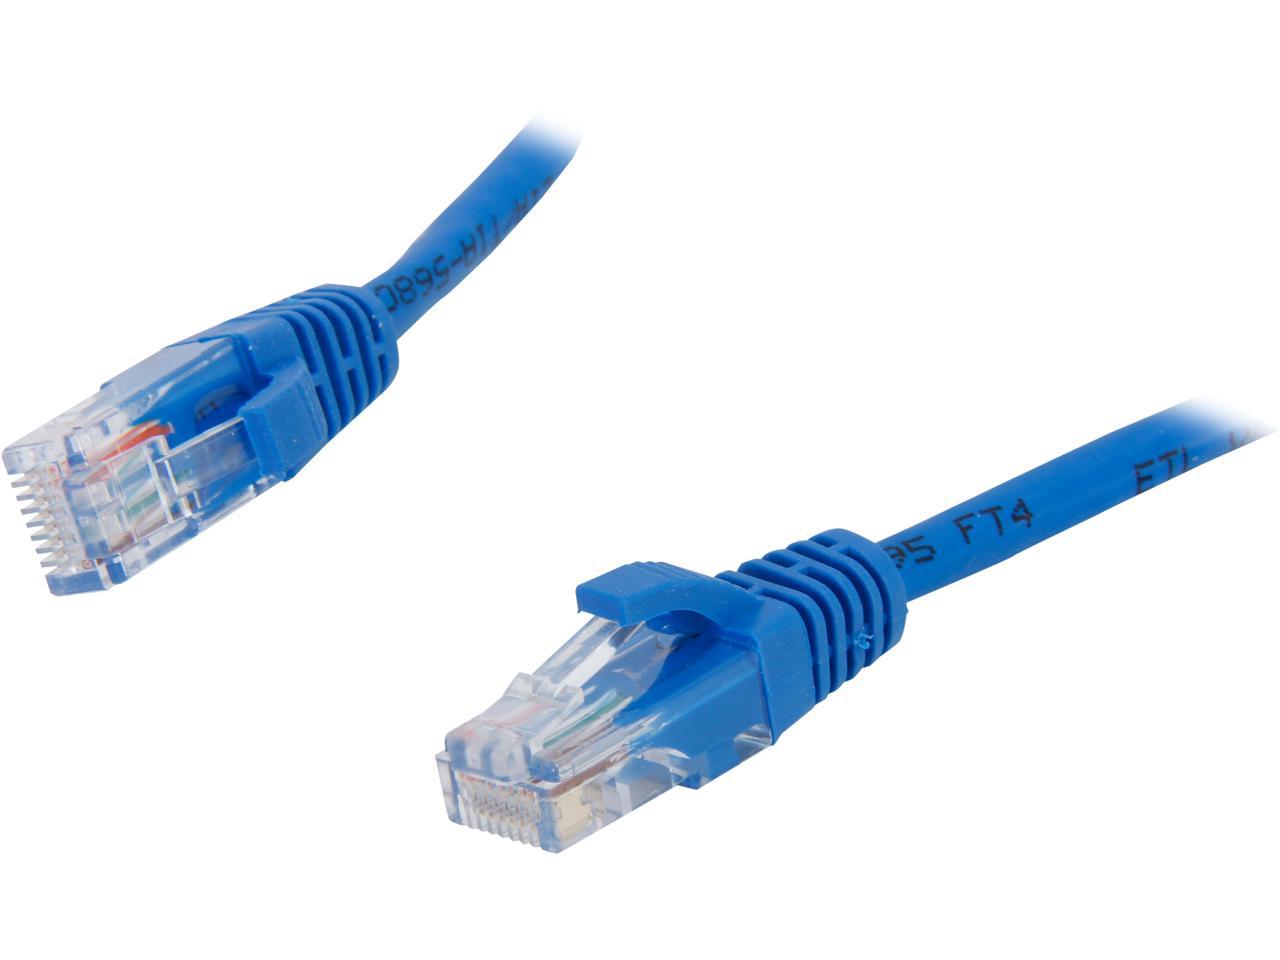 C2G 00394 Cat5e Cable - Snagless Unshielded Ethernet Network Patch Cable, Blue (6 Feet, 1.82 Meters)